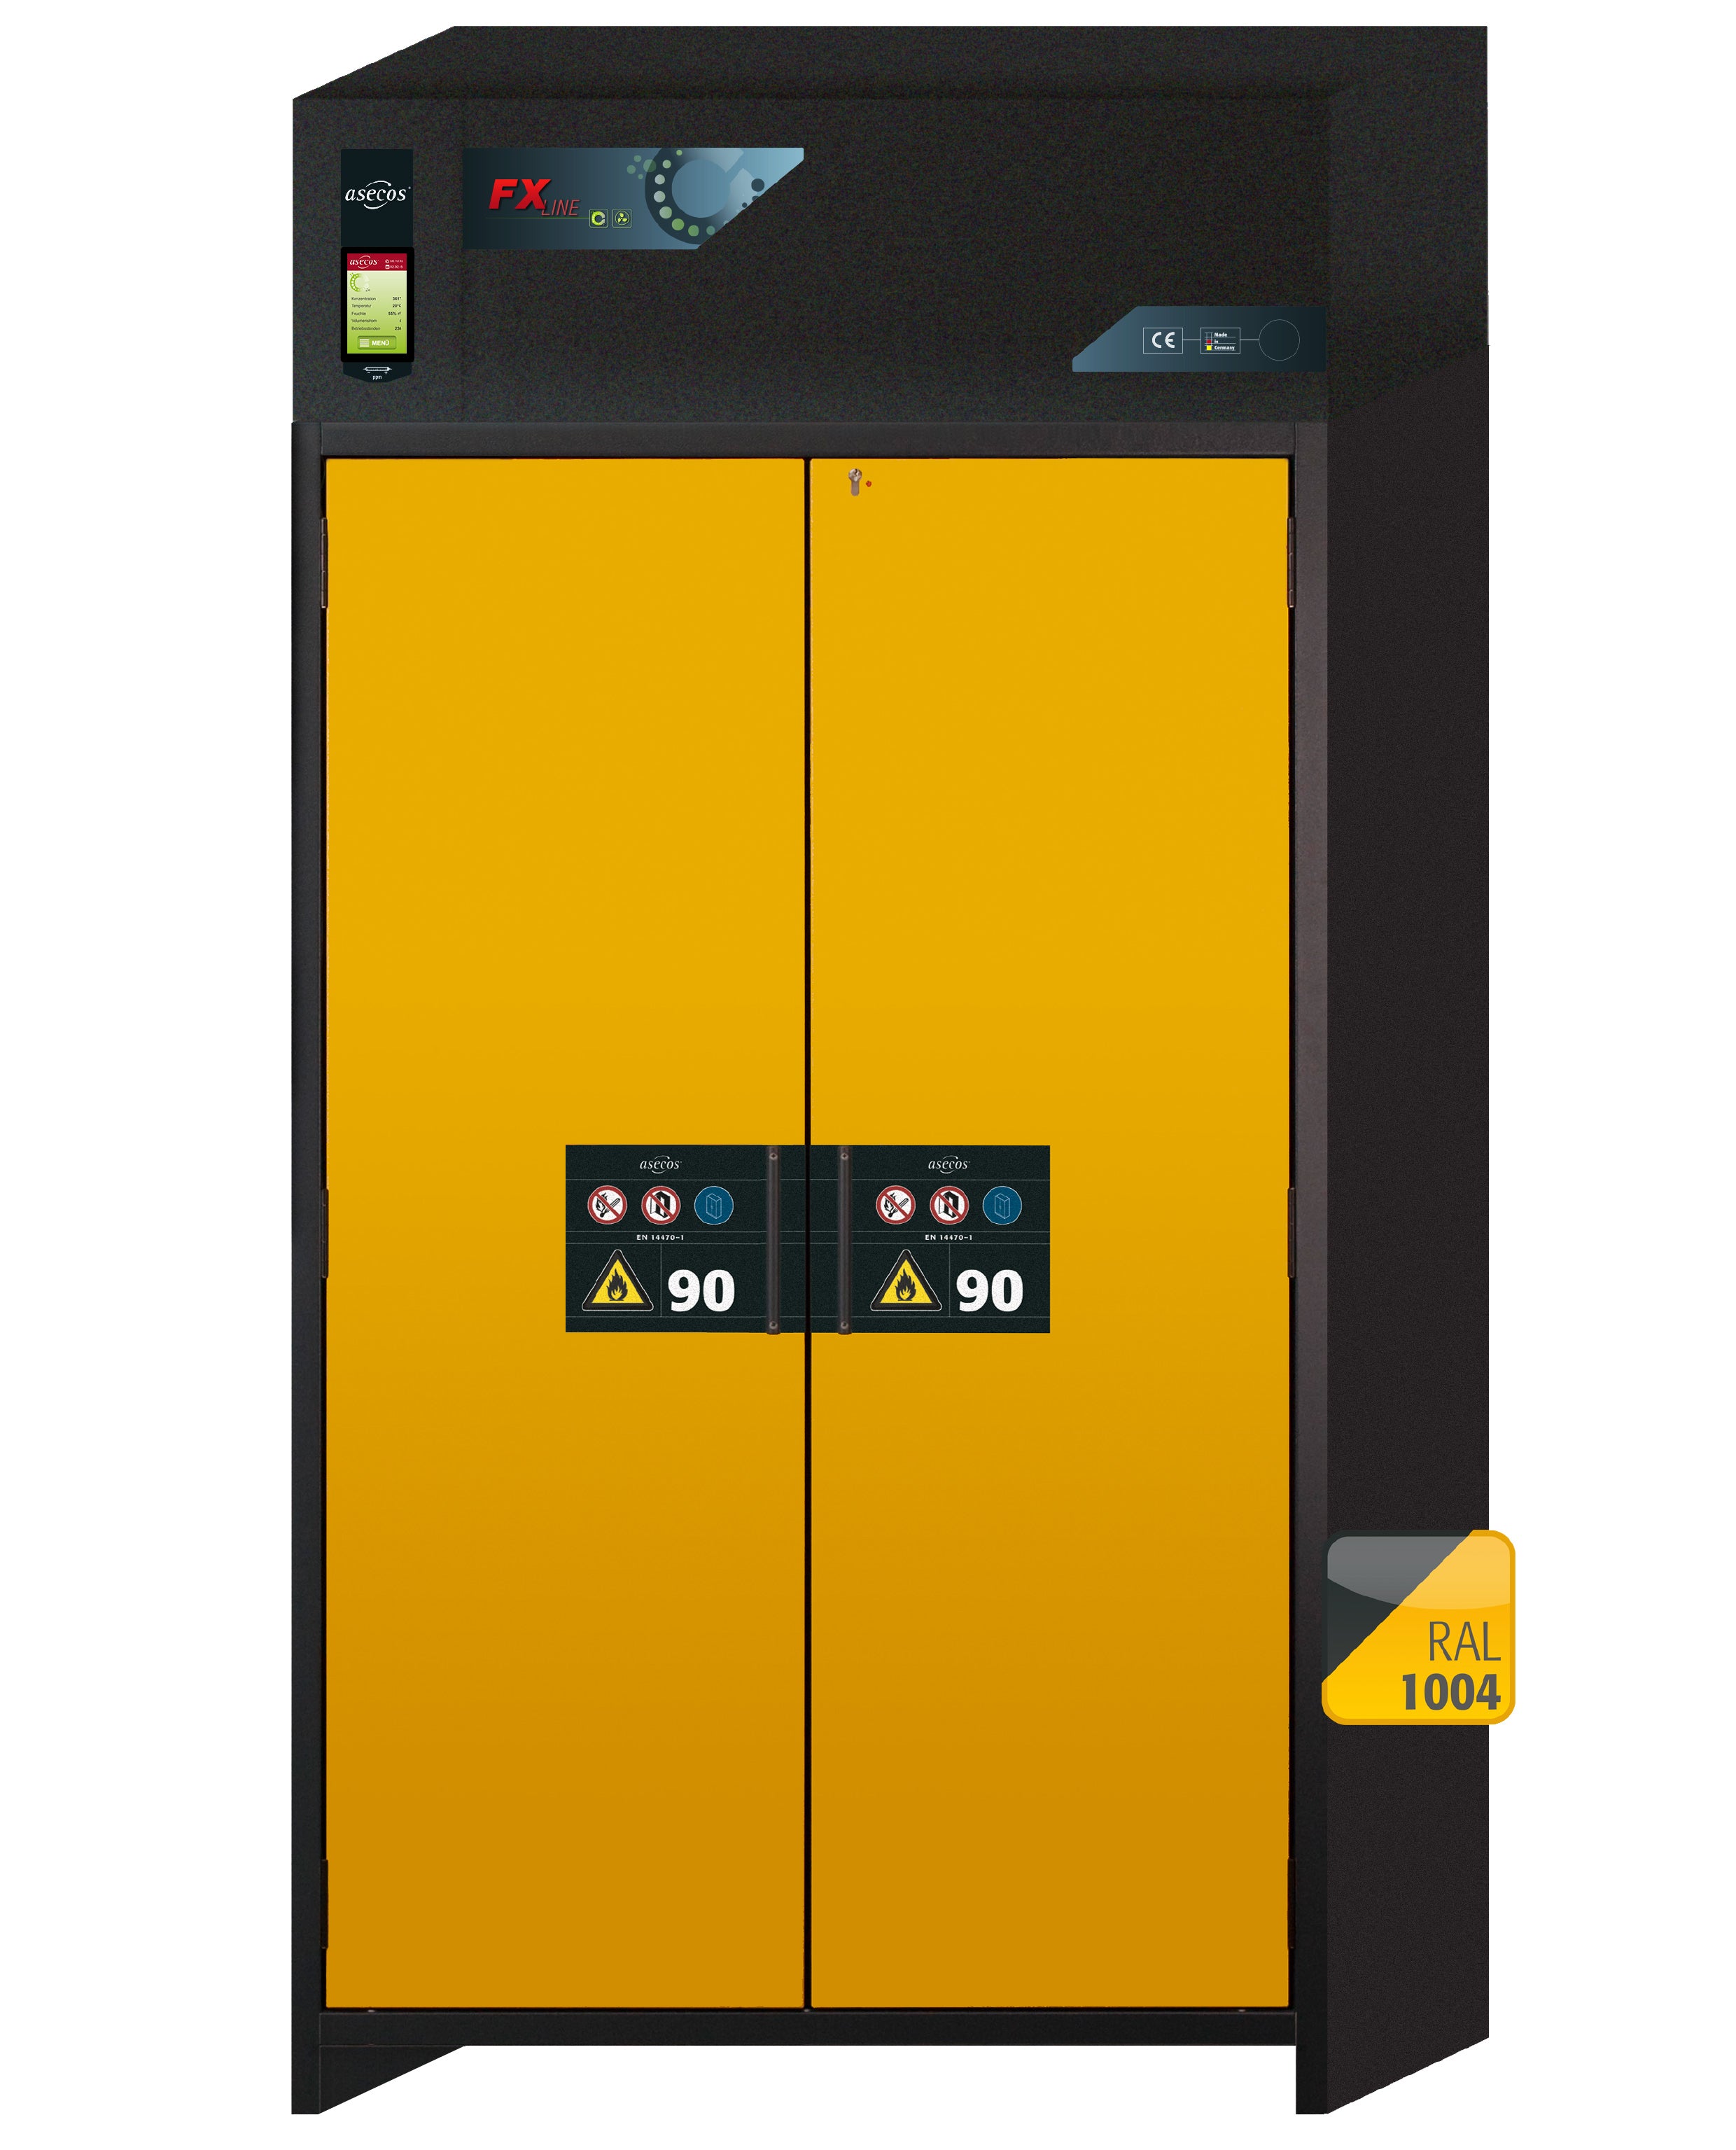 Type 90 recirculating air filter cabinet FX-CLASSIC-90 model FX90.229.120.MV in safety yellow RAL 1004 with 6x standard pull-out tray (stainless steel 1.4301)